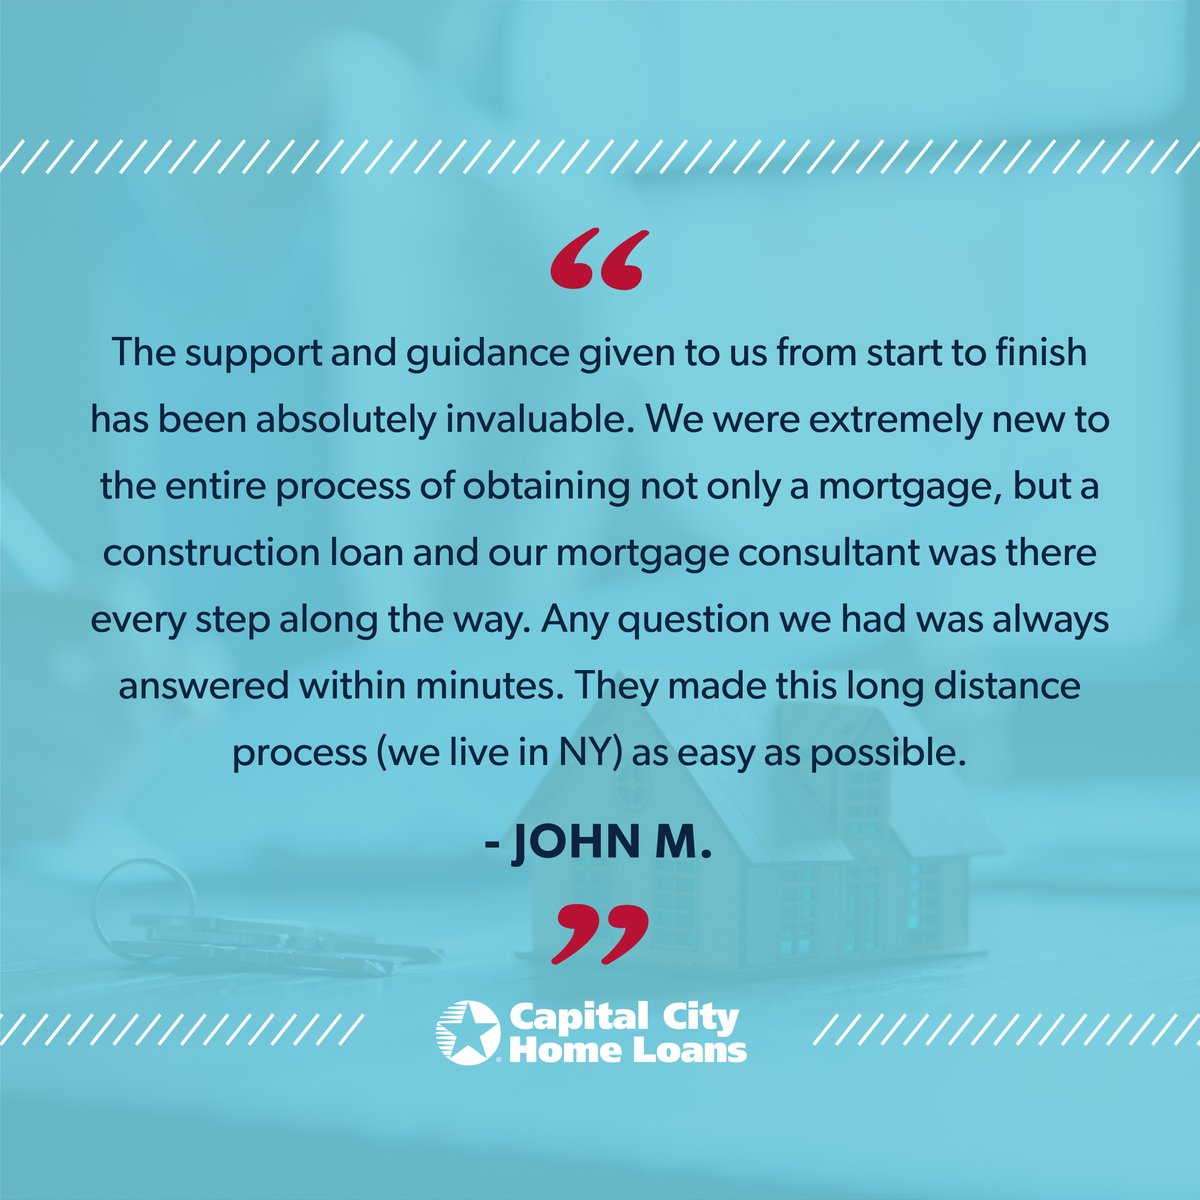 Our mortgage consultants are flexible in finding the perfect loan product for your individual needs.

#cchl #testimonial #constructionloan #newhome